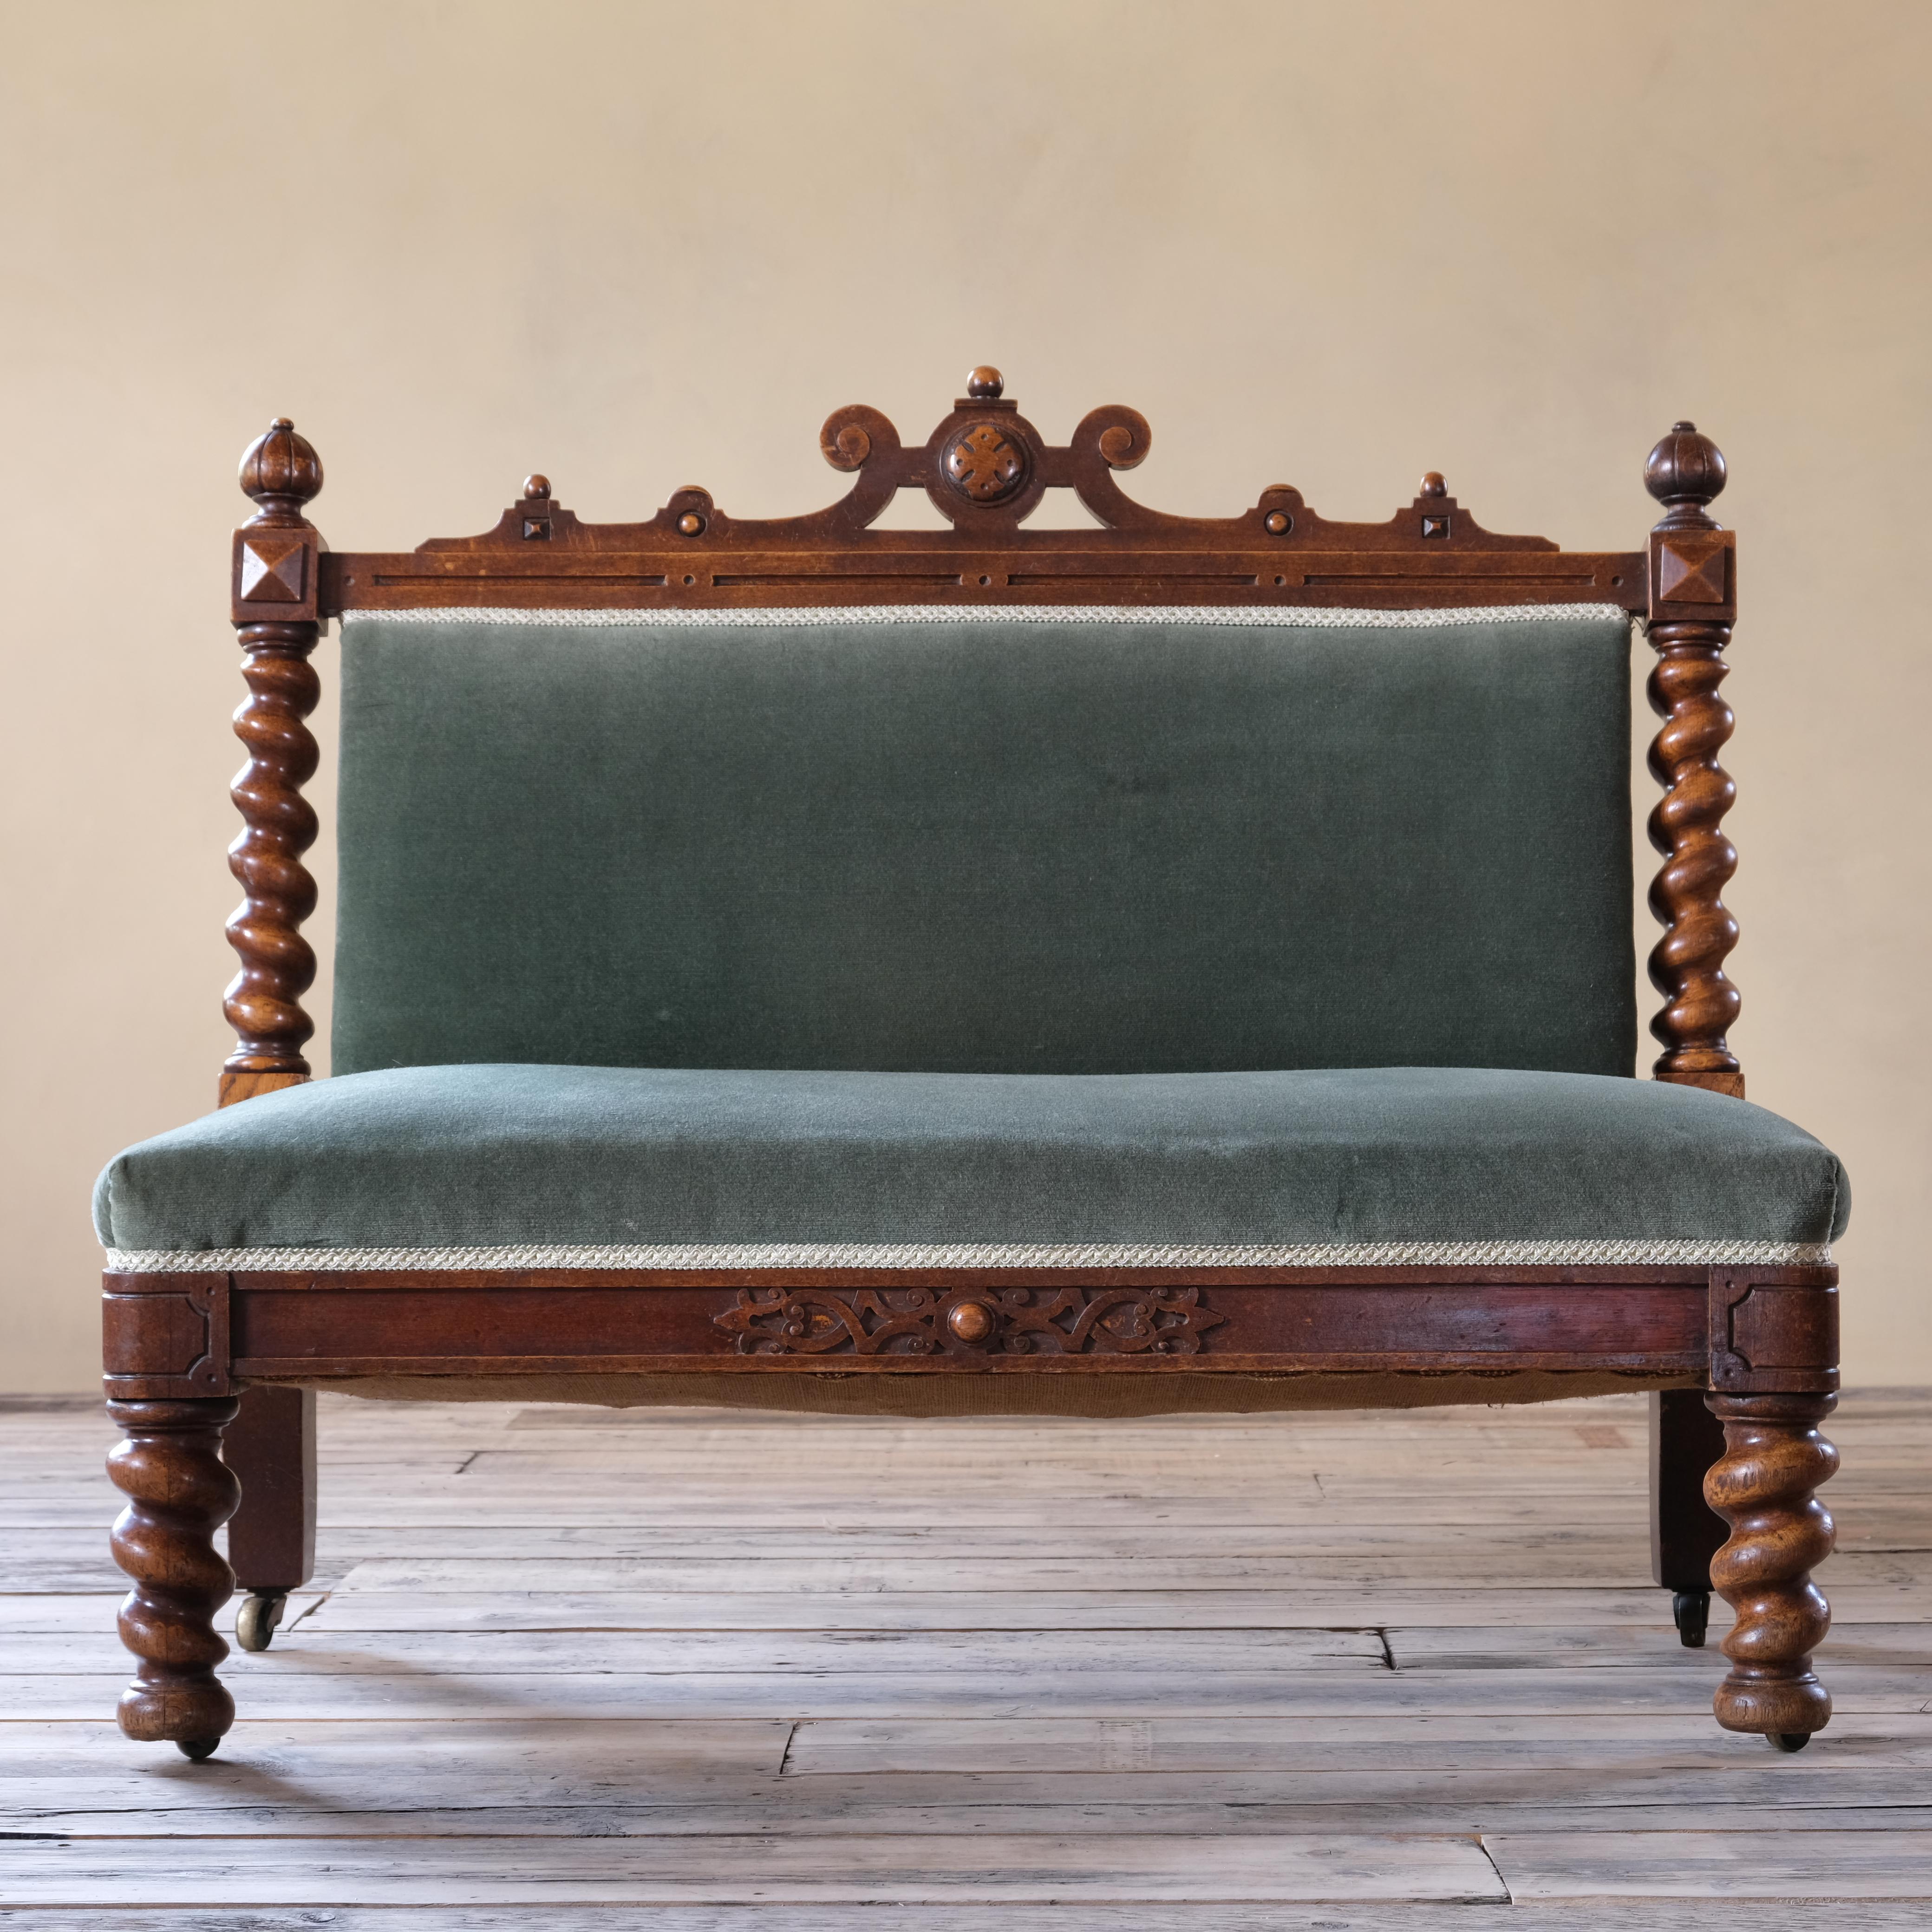 A 19th century oak 2 seater bench with barley twist legs and back supports. fret work to the side rails and on its original Cope & Collinson brass casters. 

Upholstered in a green velvet. Structurally sound and ready for use. 

If you would